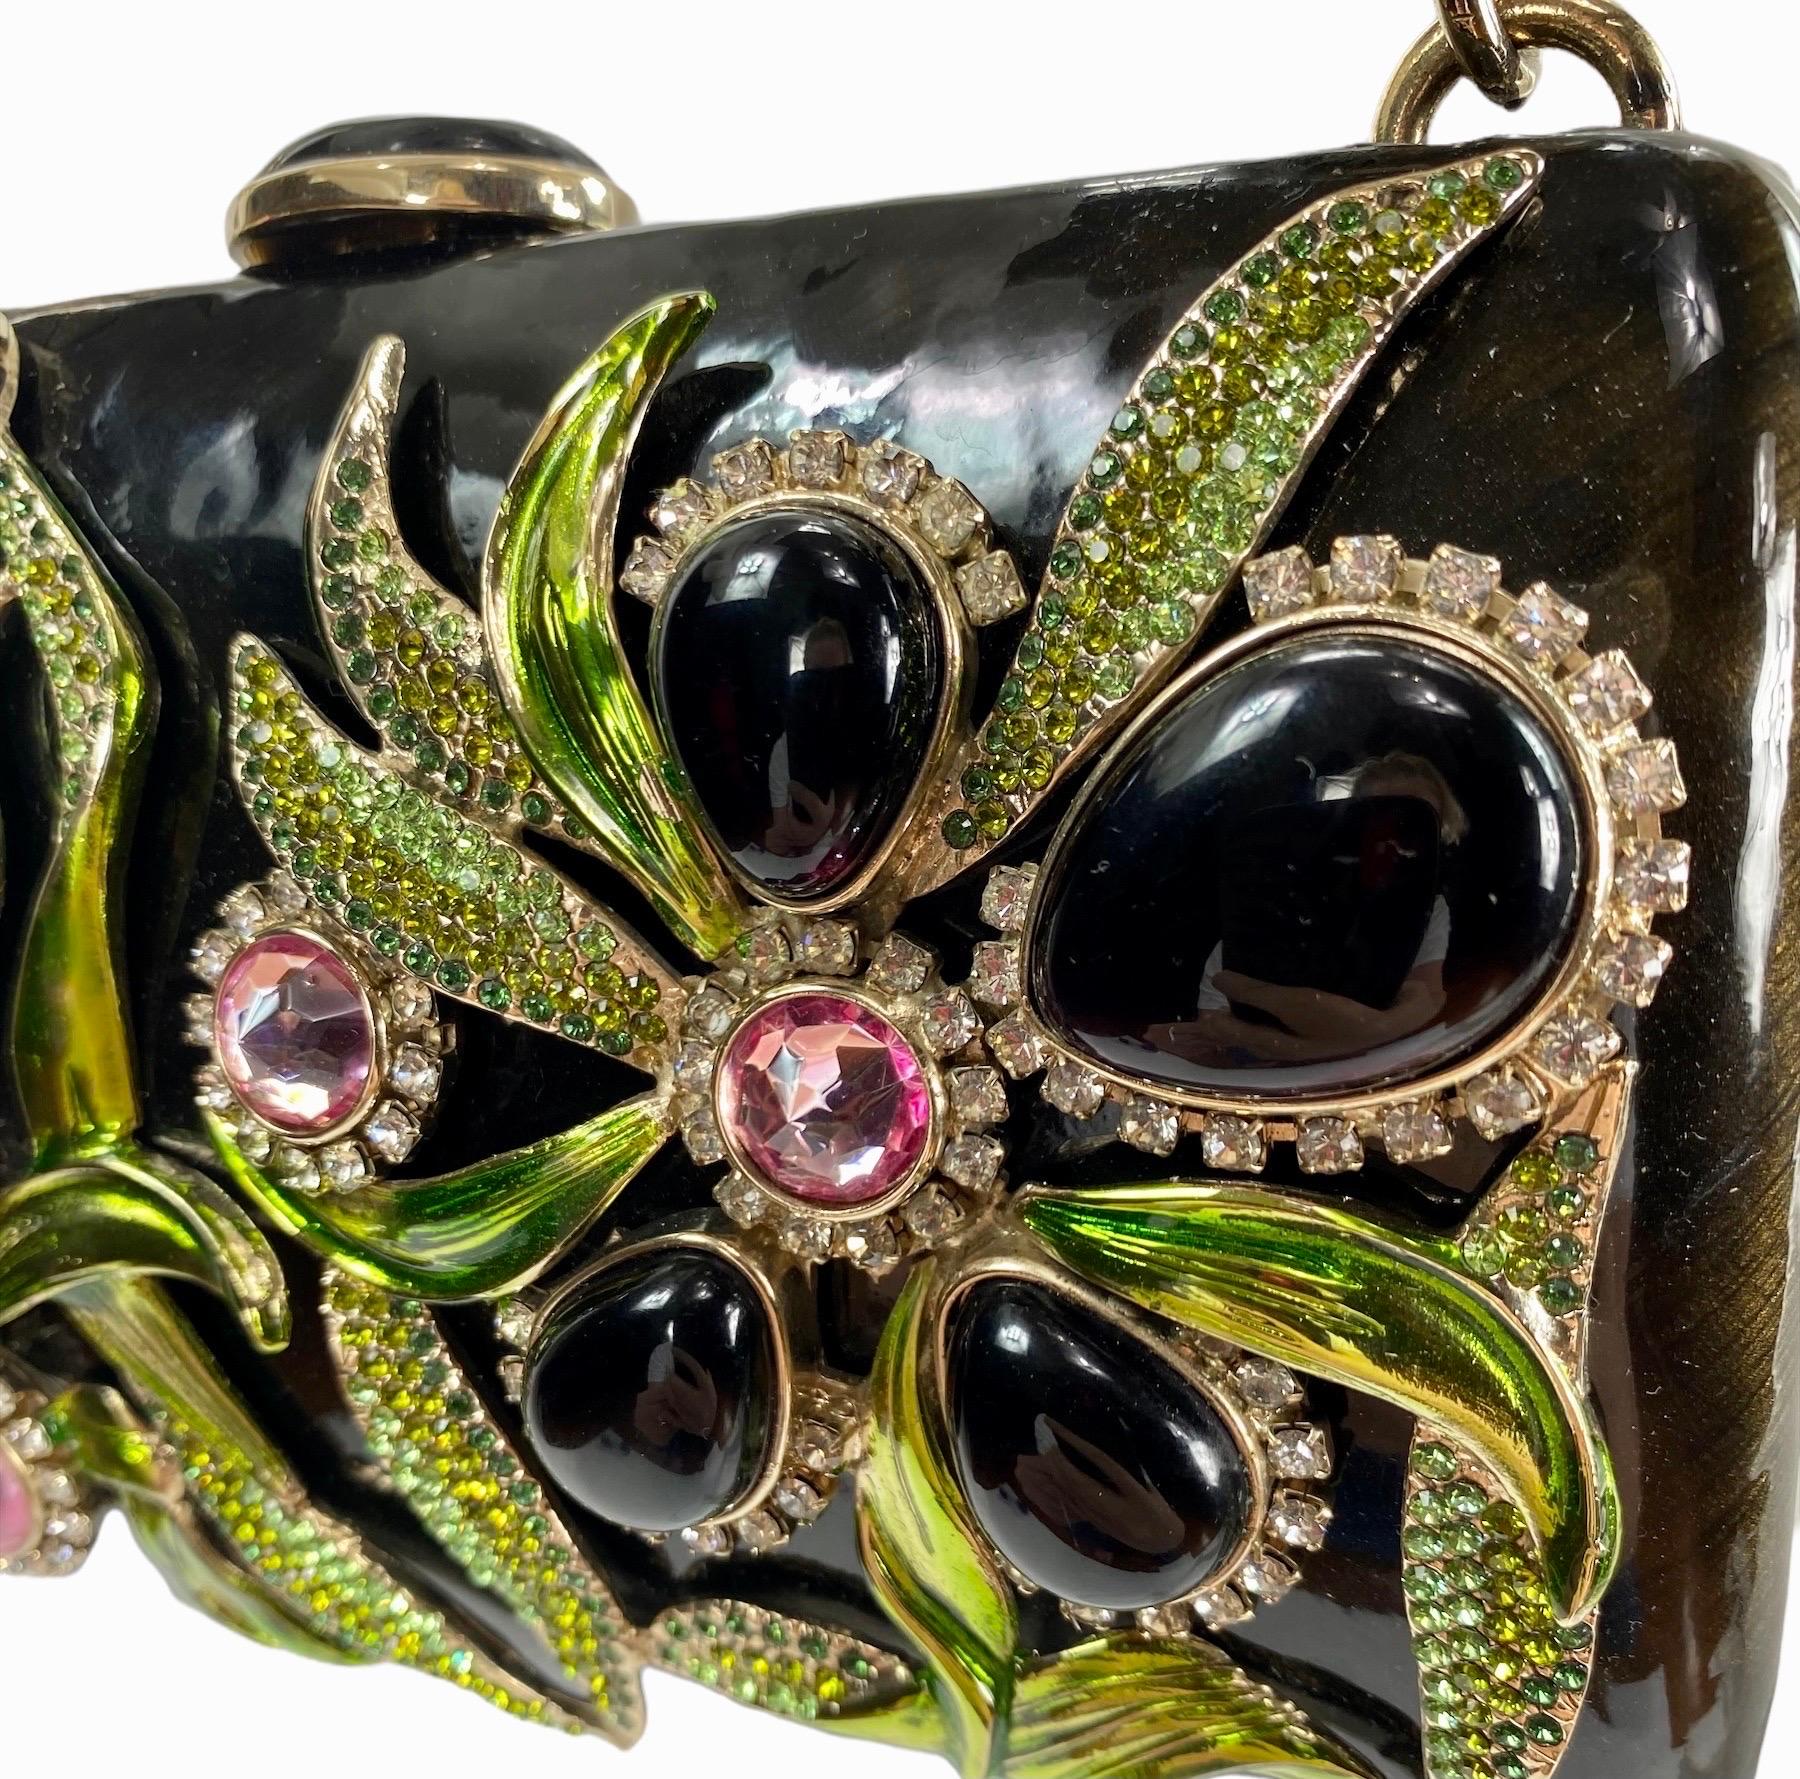 Black Tom Ford for Yves Saint Laurent Rive Gauche S/S 2004 Enamel Jeweled Clutch Bag For Sale